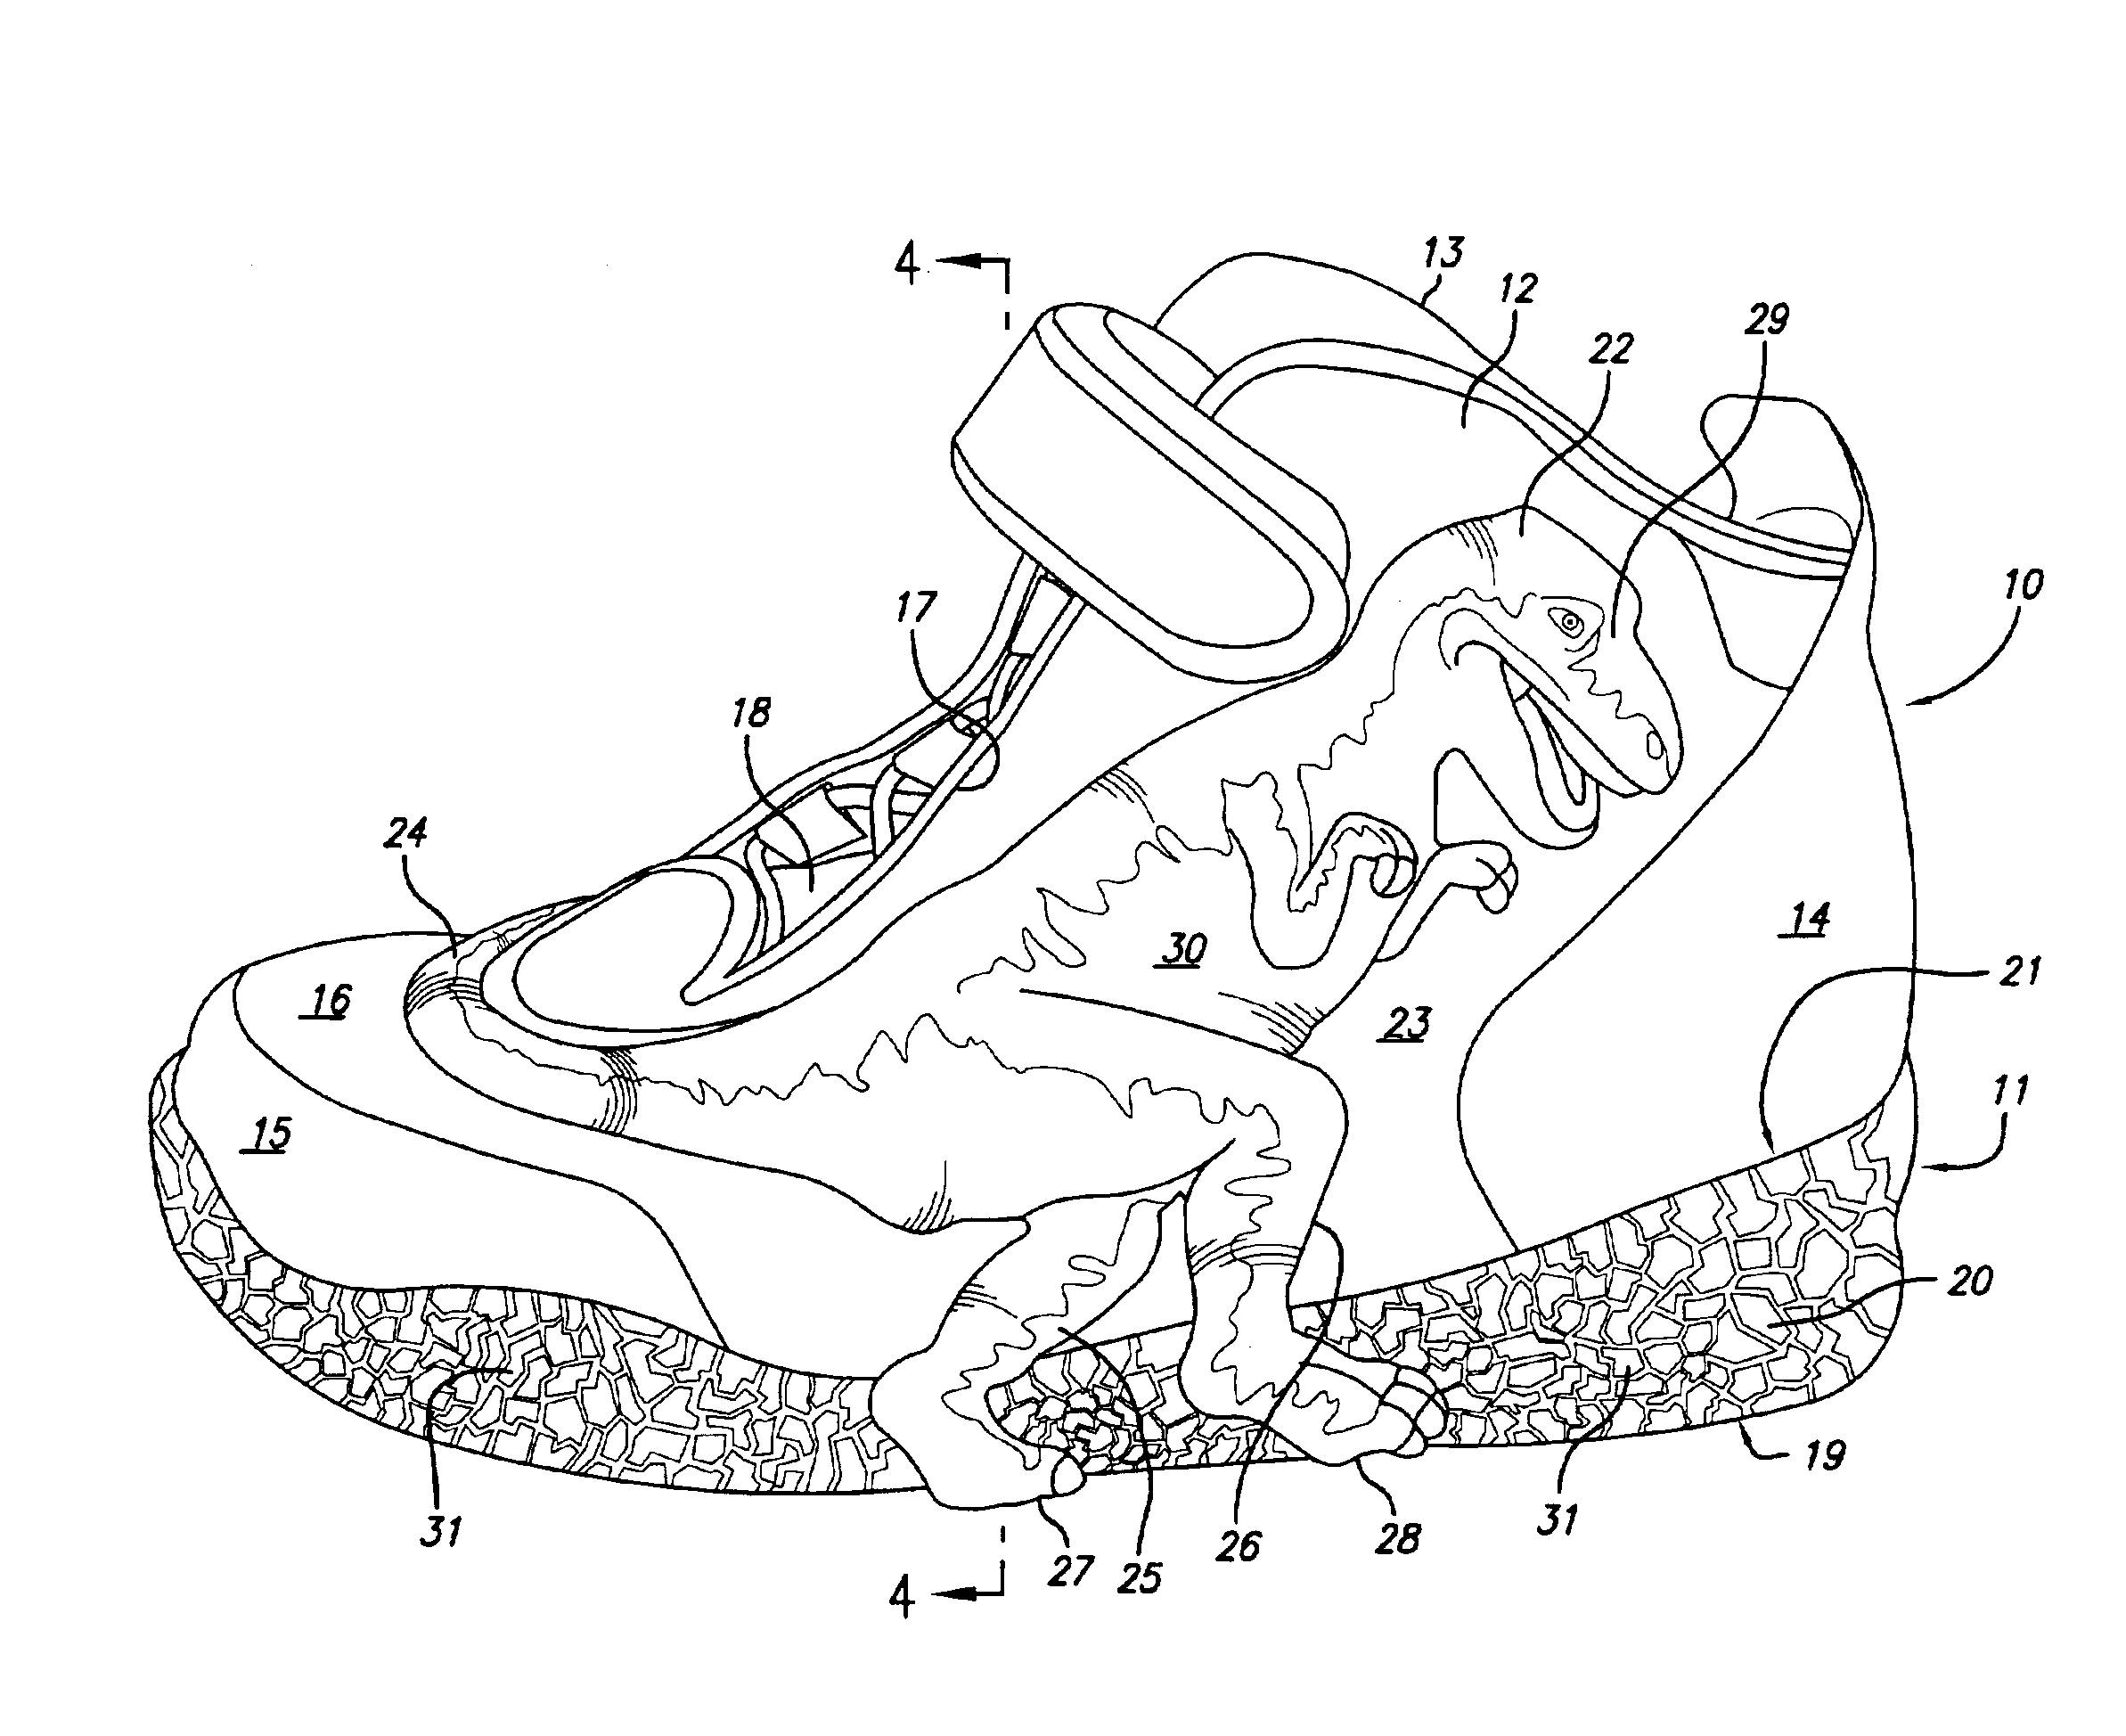 Footwear with surrounding ornamentation